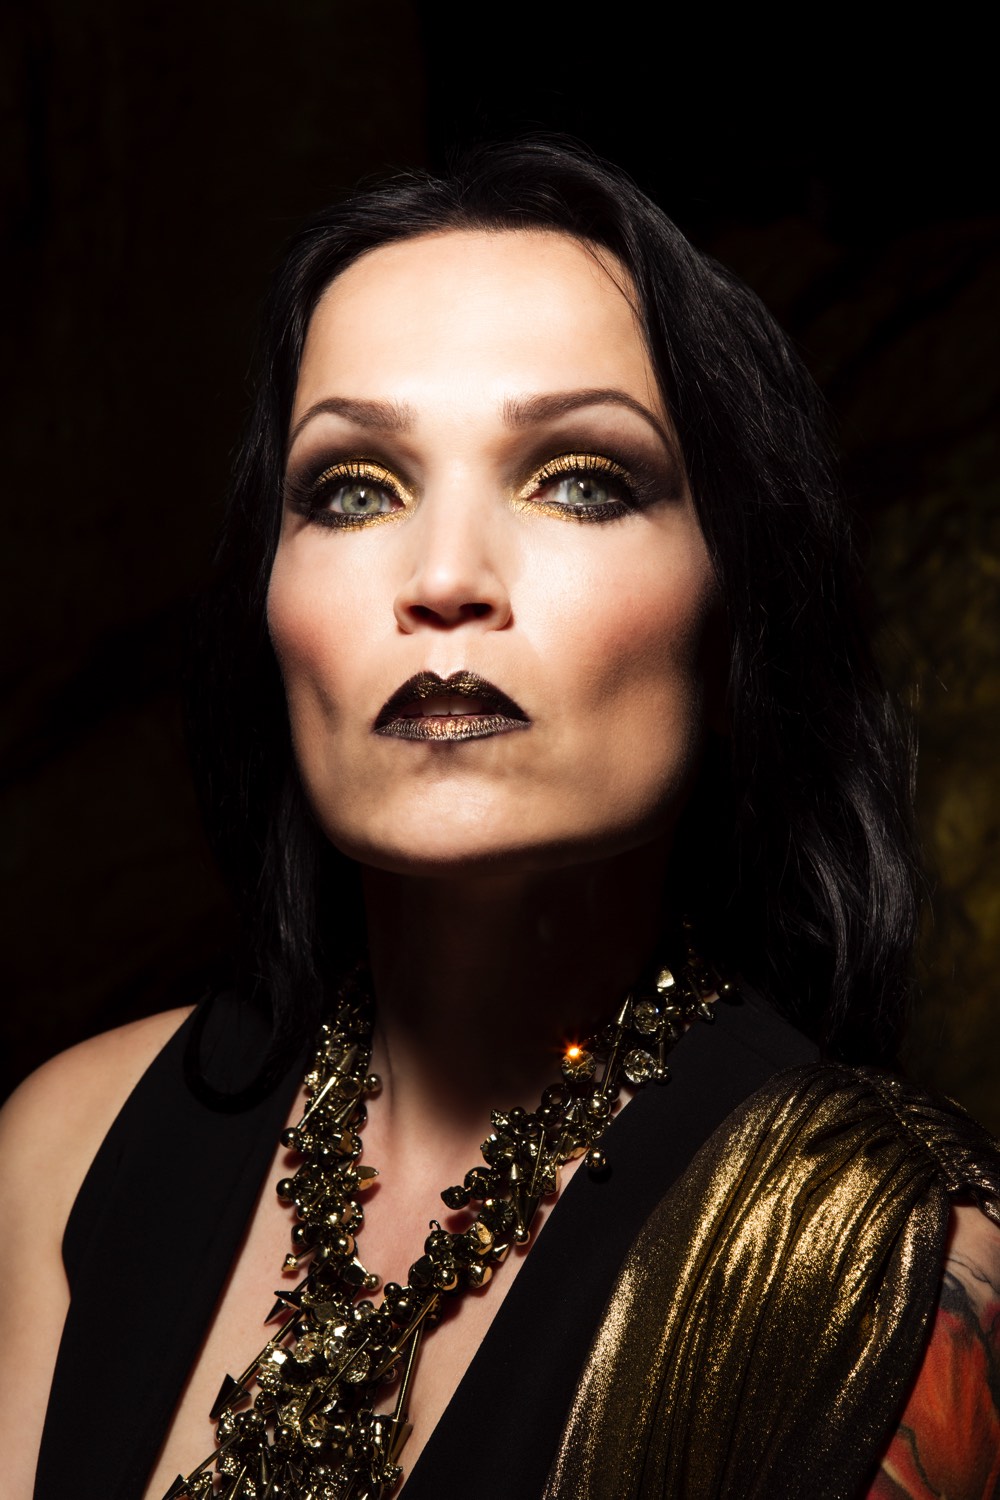 TARJA-In-The-Raw-Press-Pictures-122019-6-Copyright-earMUSIC-Photo-Credit-Tim-Tronckoe-1000px